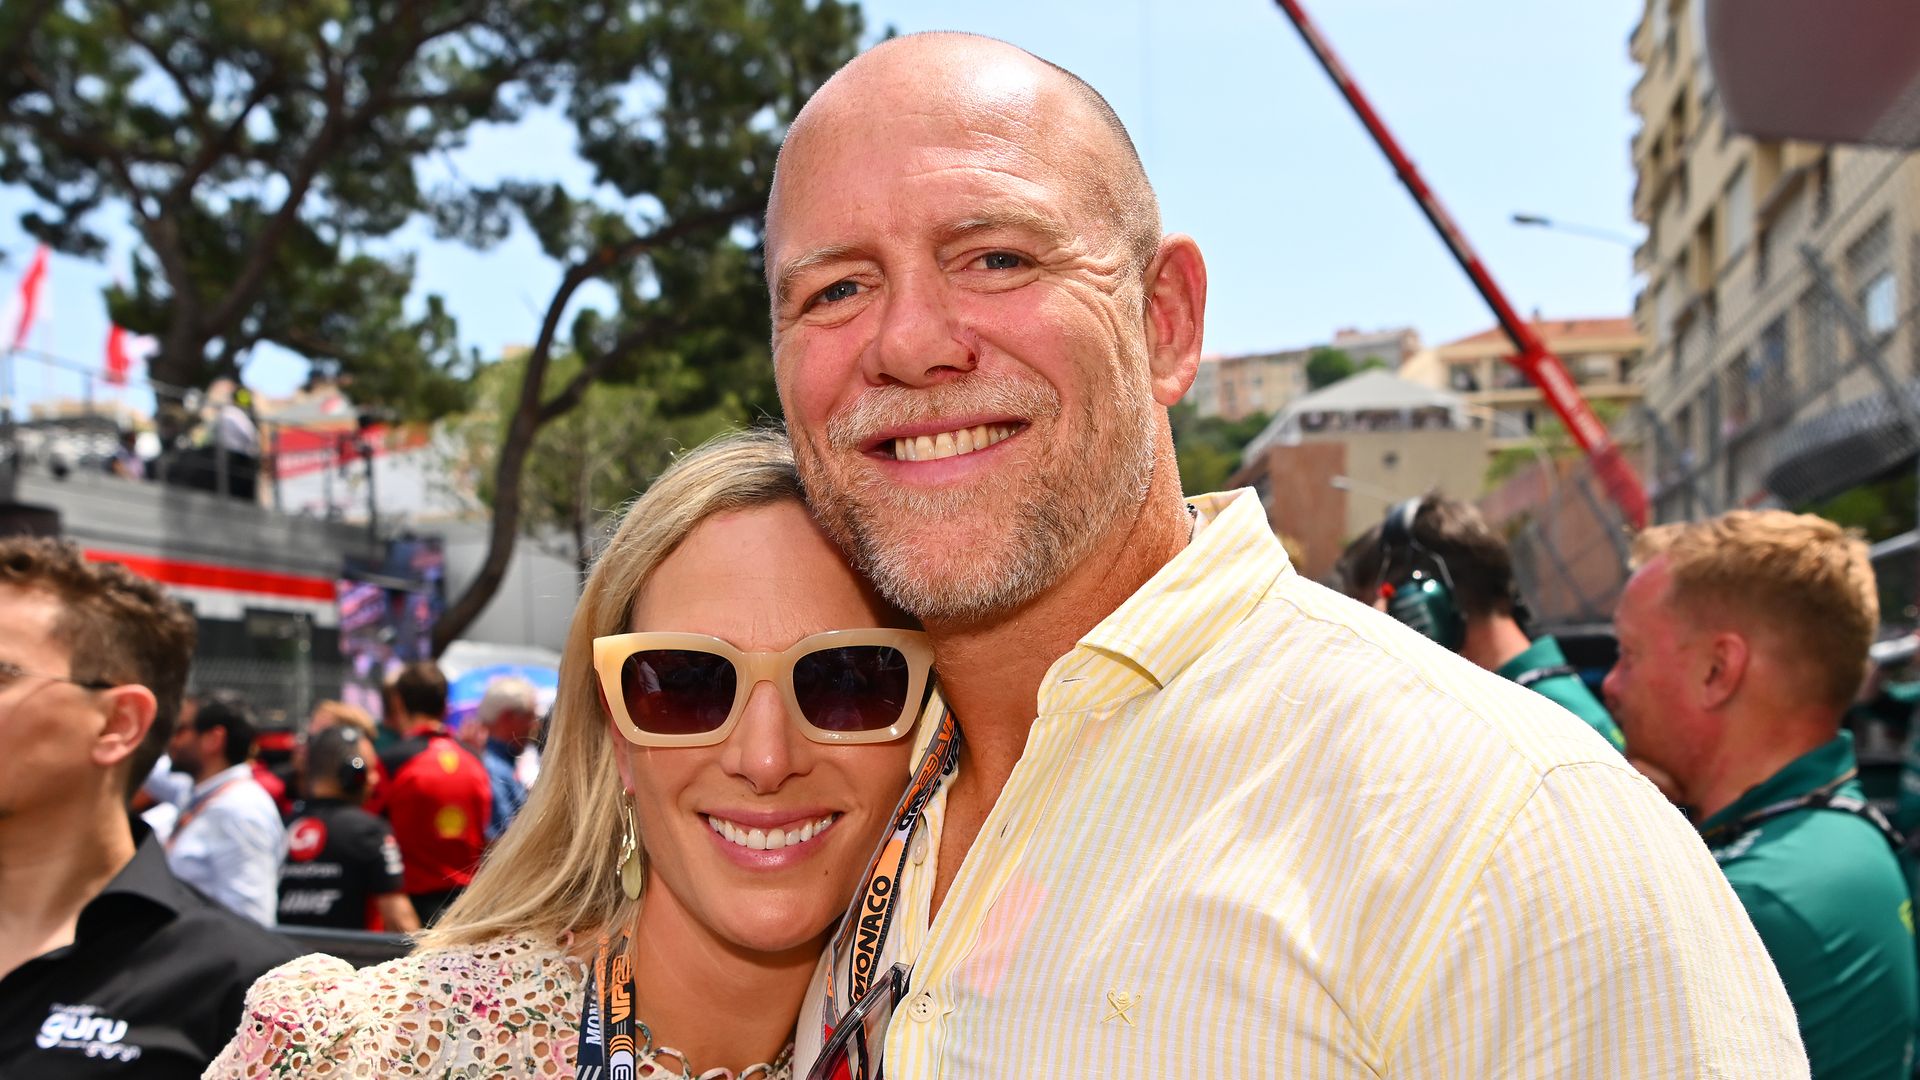 Mike Tindall and Zara Tindall pose for a photo on the grid during the F1 Grand Prix of Monaco at Circuit de Monaco on May 28, 2023 in Monte-Carlo